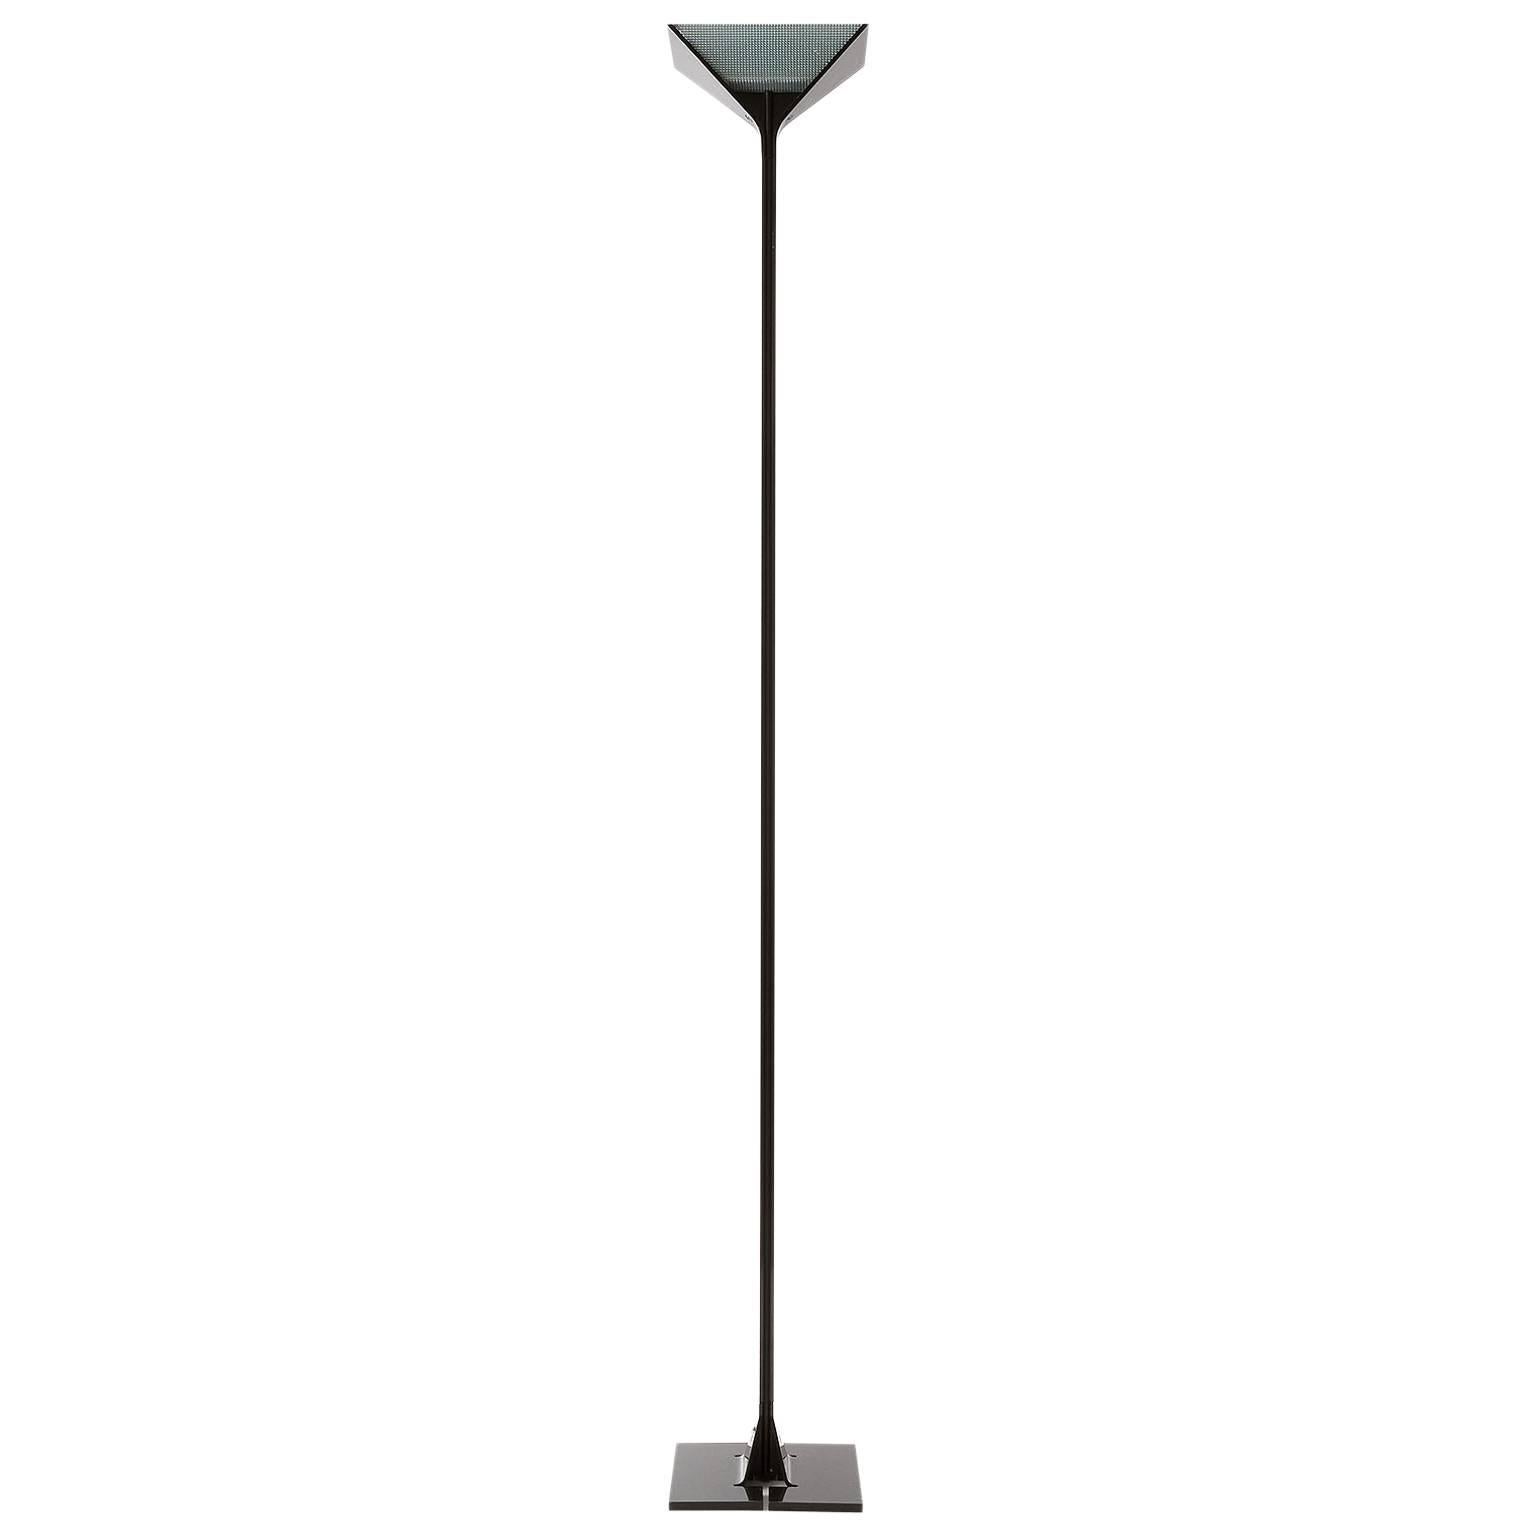 Papillona Floor Lamp by Tobia Scarpa for Flos, Italy